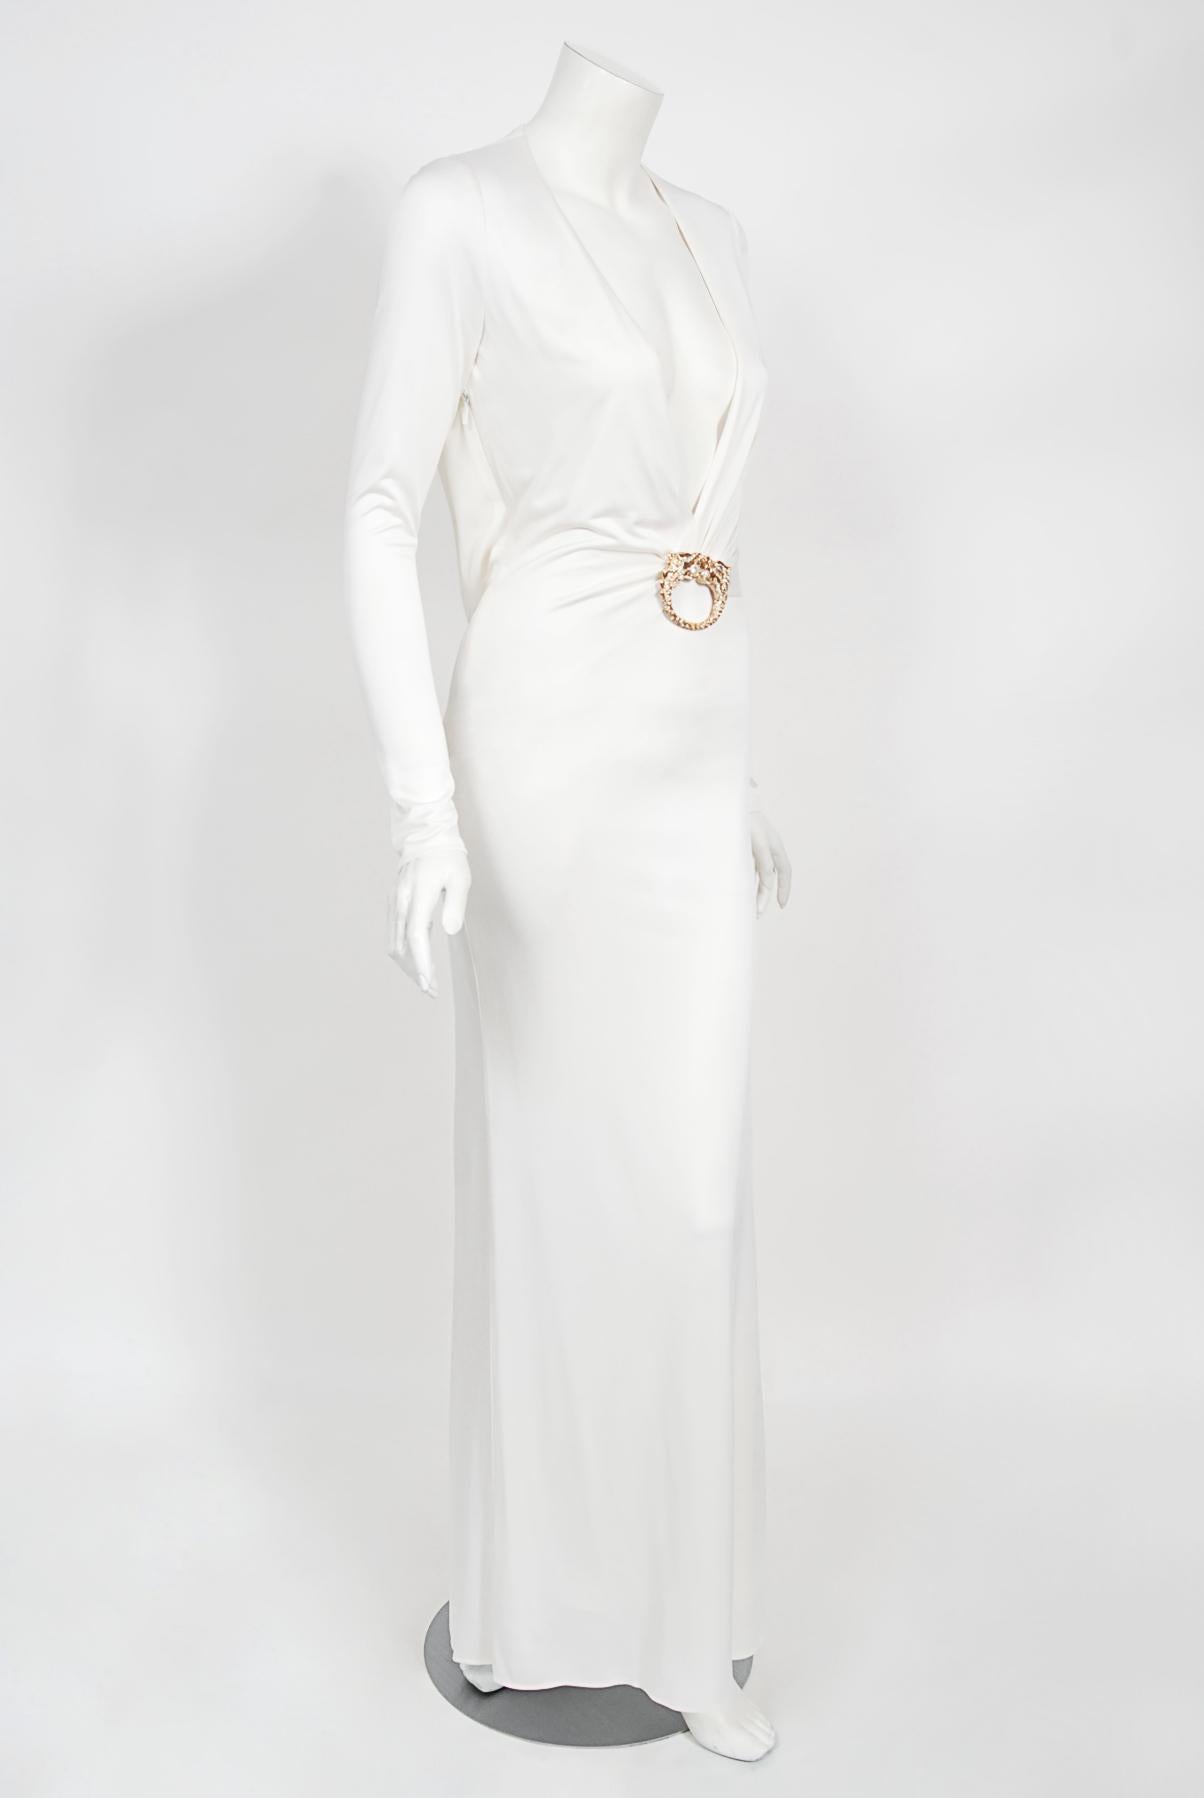 Vintage 2004 Gucci by Tom Ford Rare White Silk-Jersey Plunge Cut Out Finale Gown 7